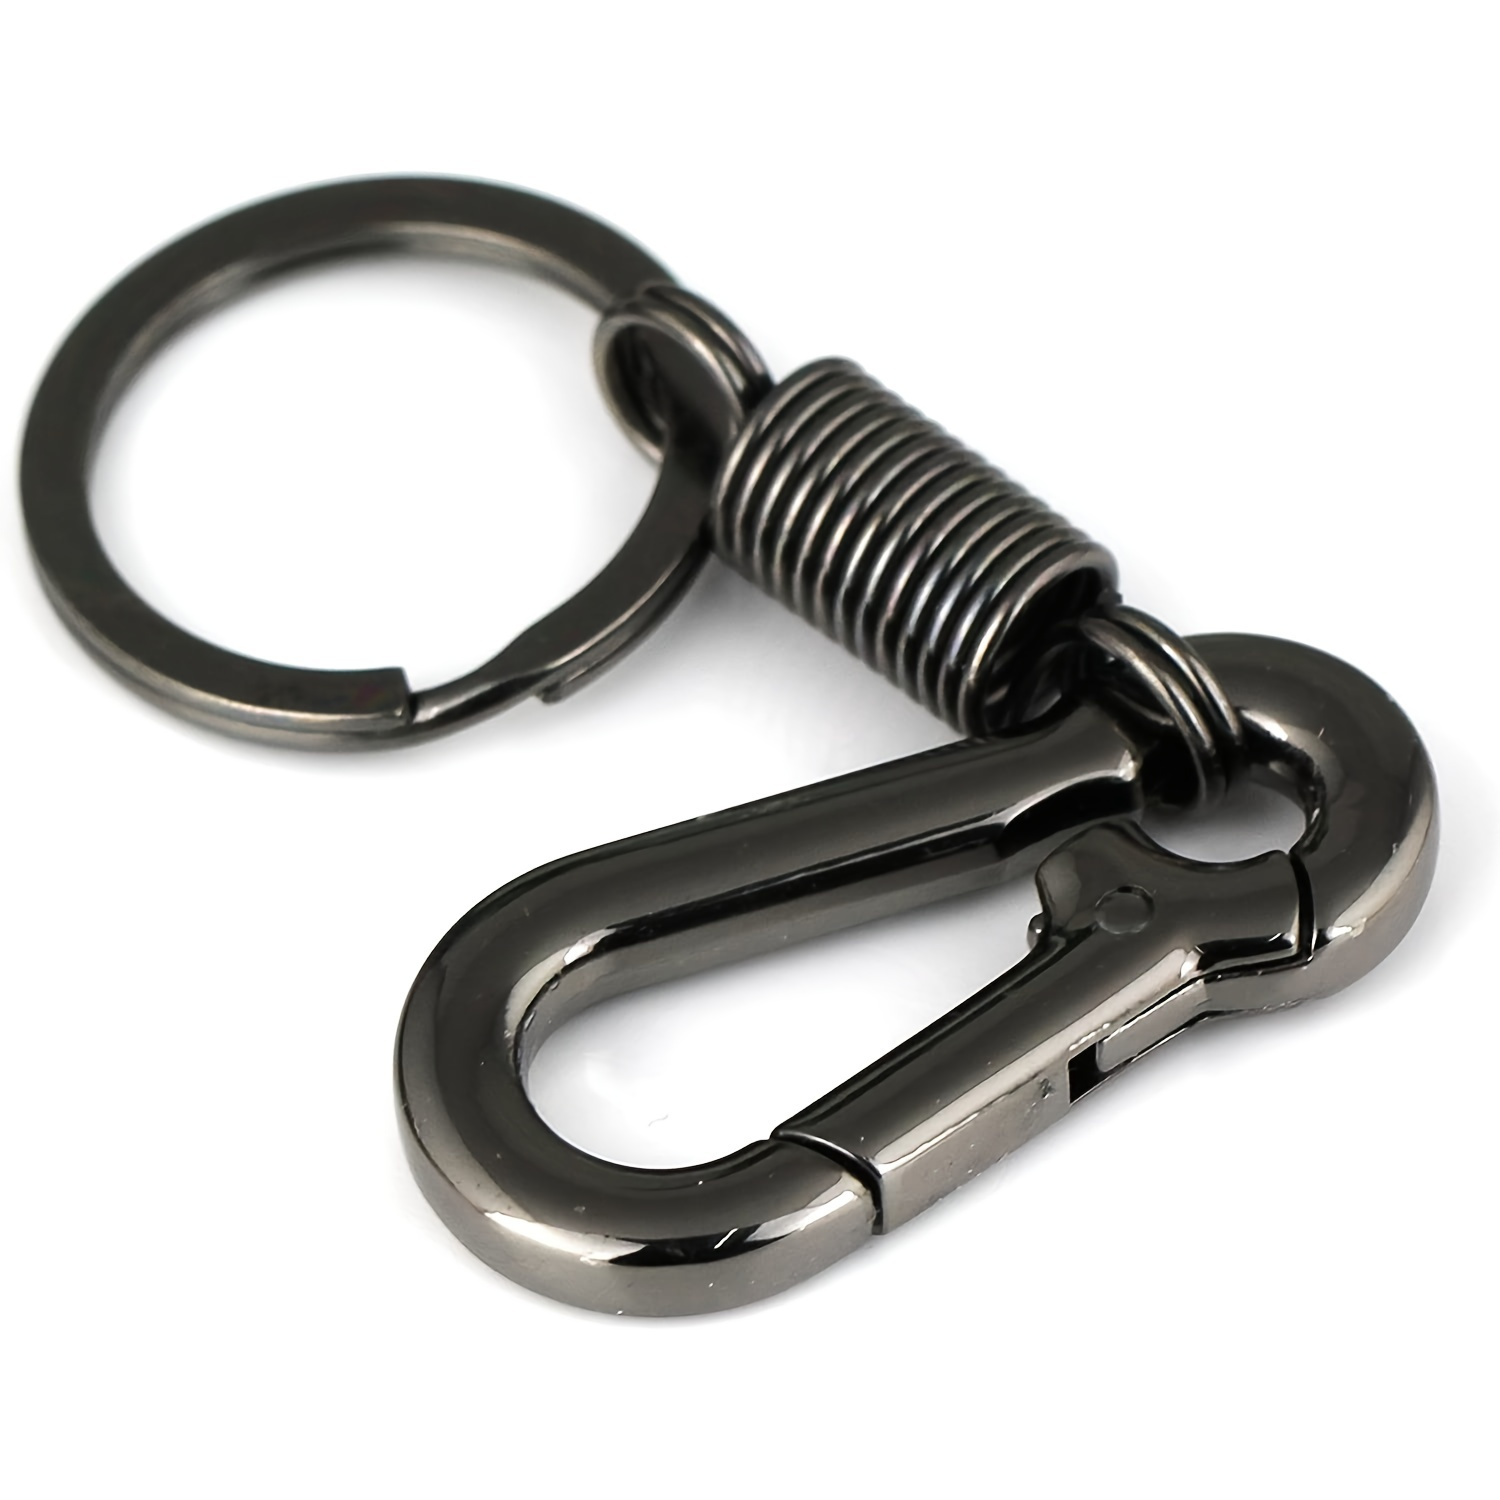 

Vintage-inspired Carabiner Keychain - A Strong & Stylish Way To Keep Your Keys Handy!